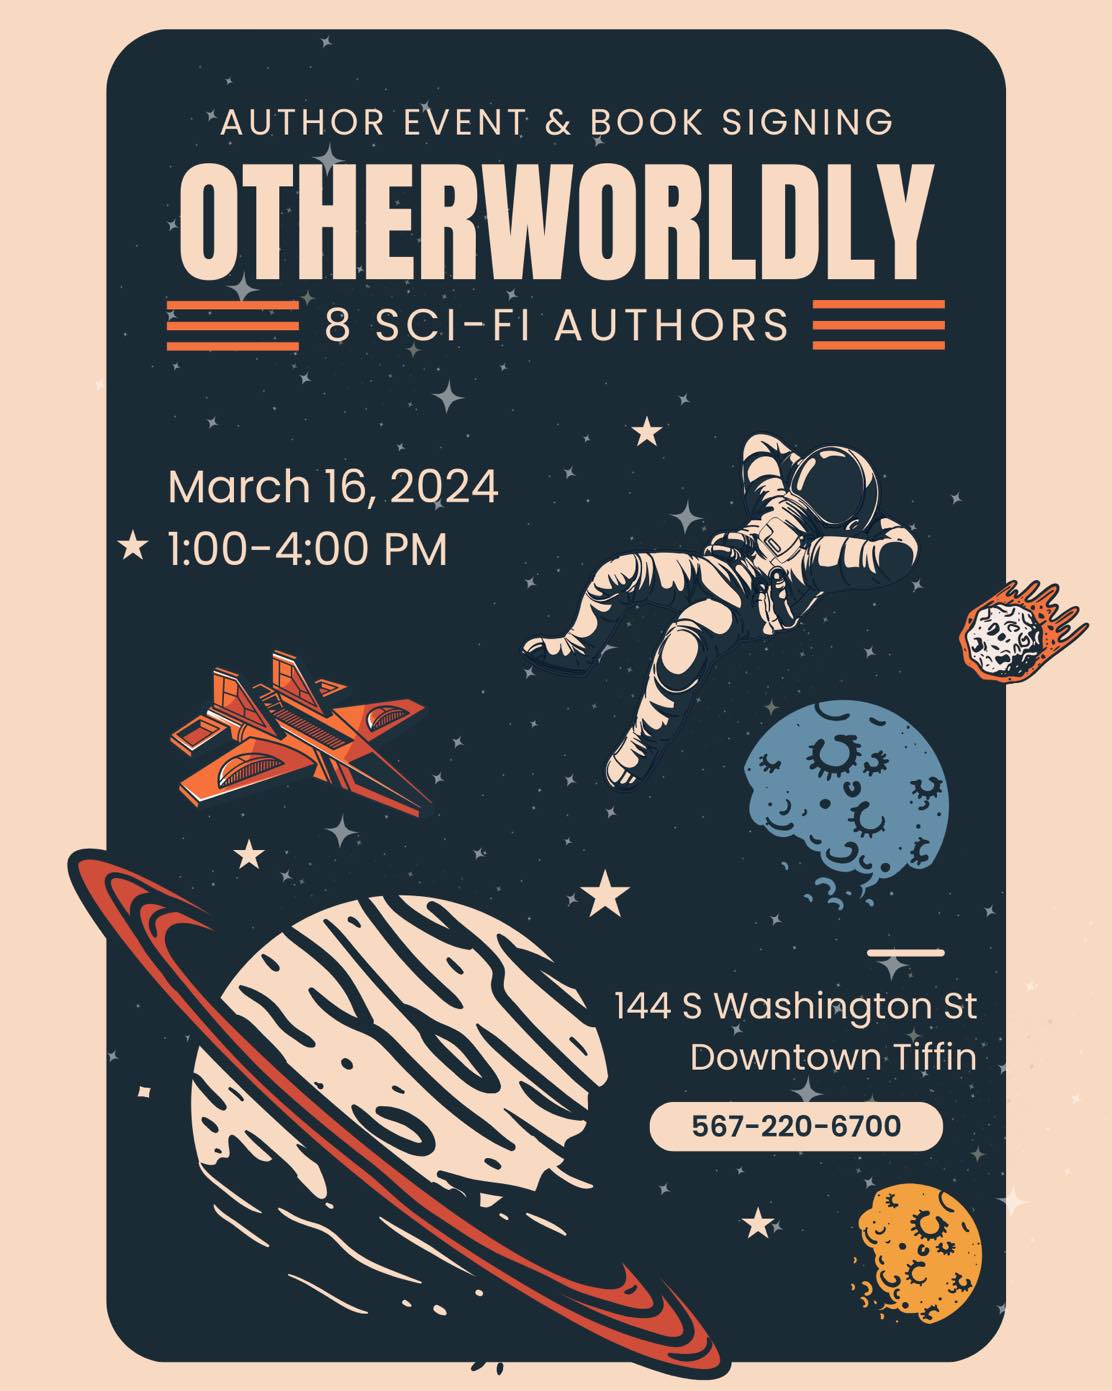 Otherworldly: Sci-Fi Author event & Book Signing